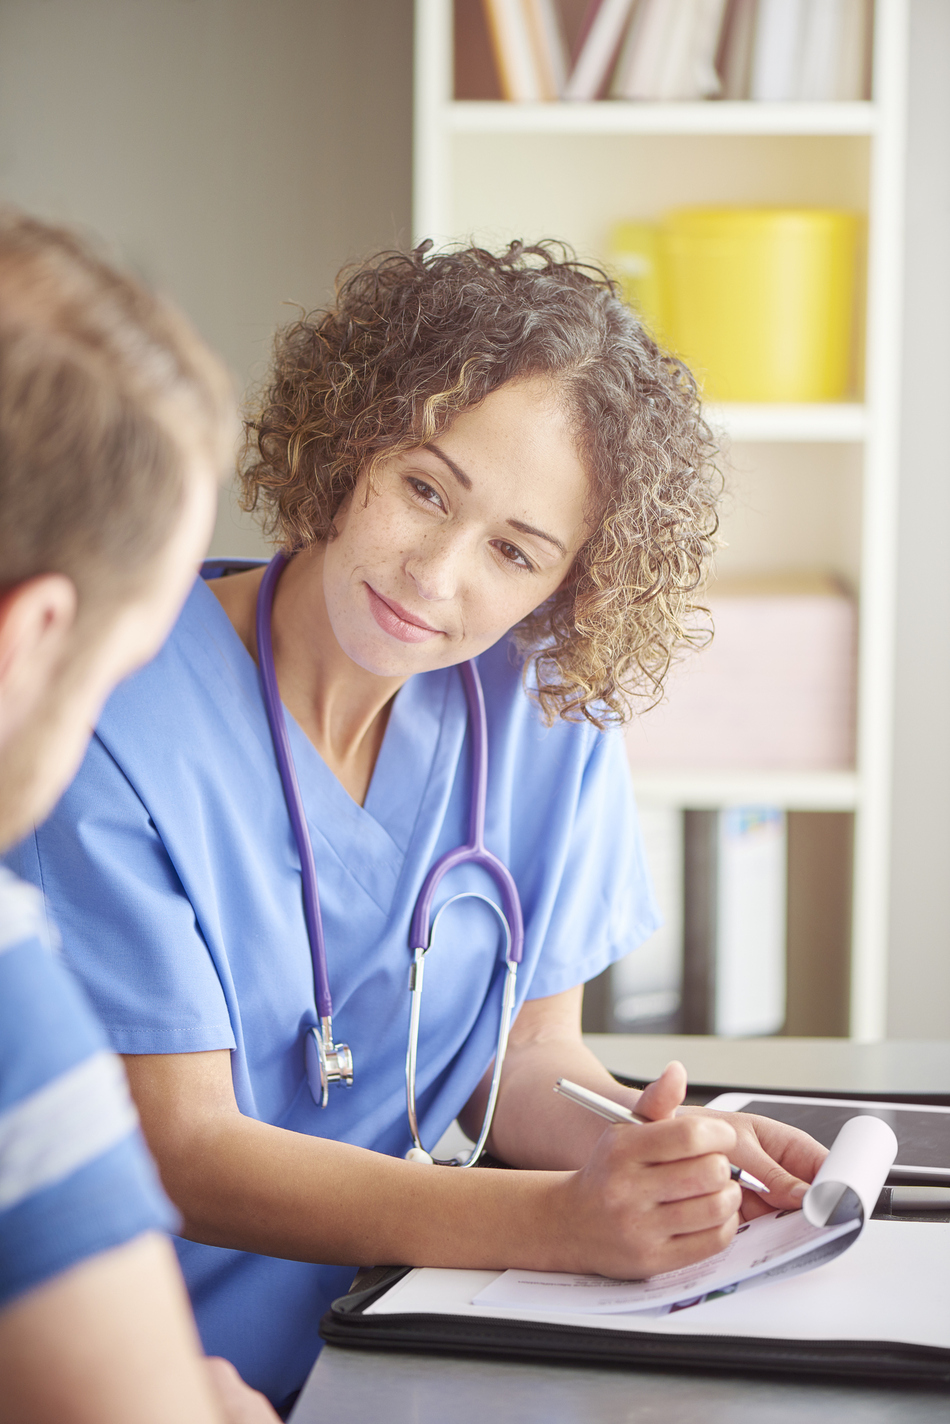 What Does a Physician Assistant Do?